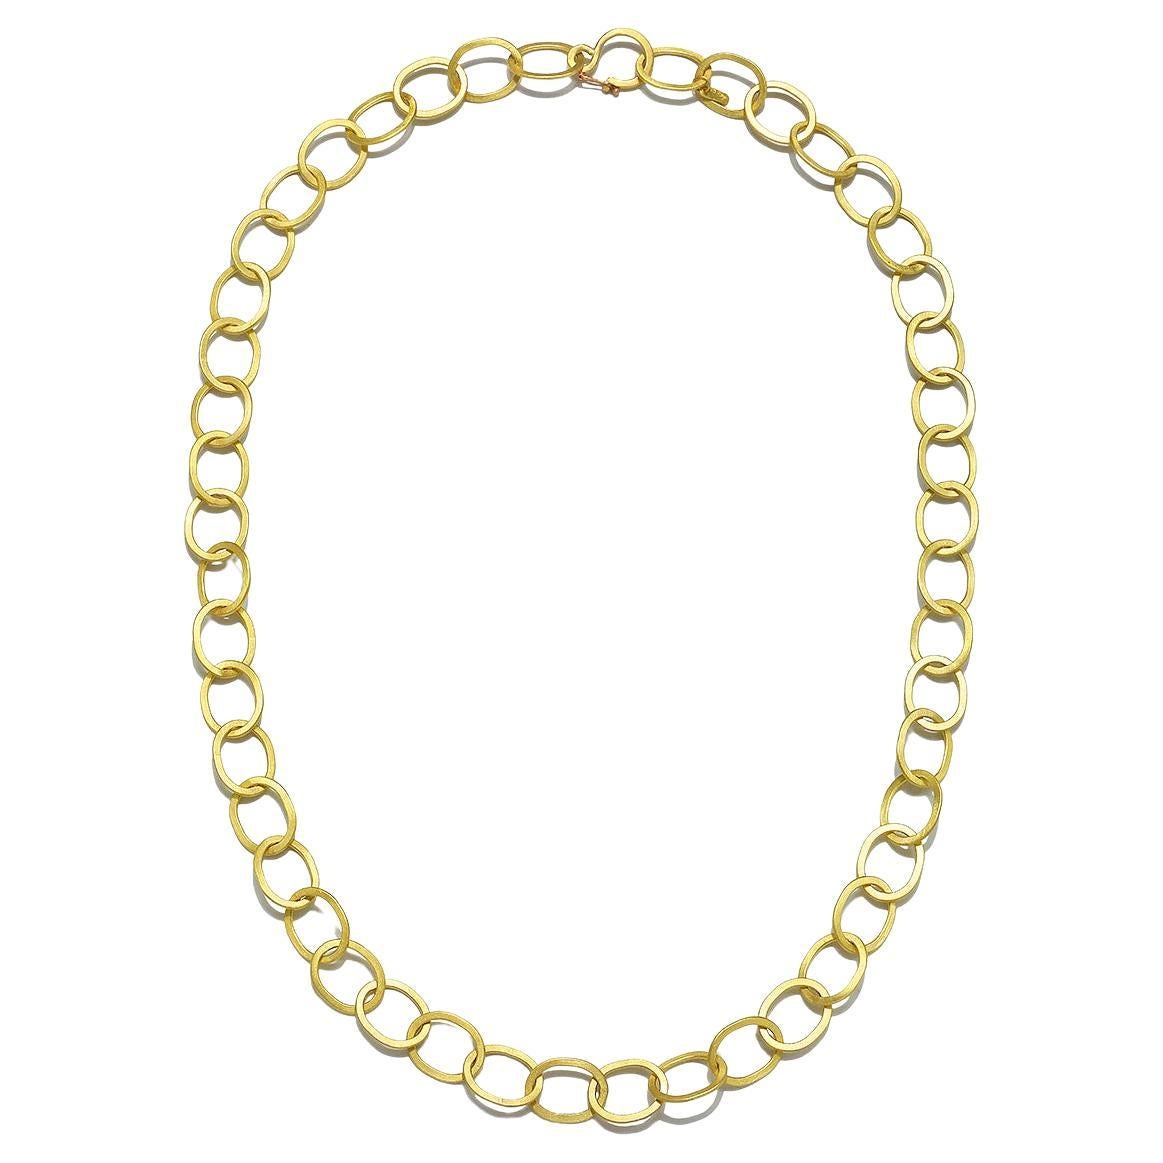 Faye Kim 18 Karat Gold Oval Planished Link Chain  For Sale